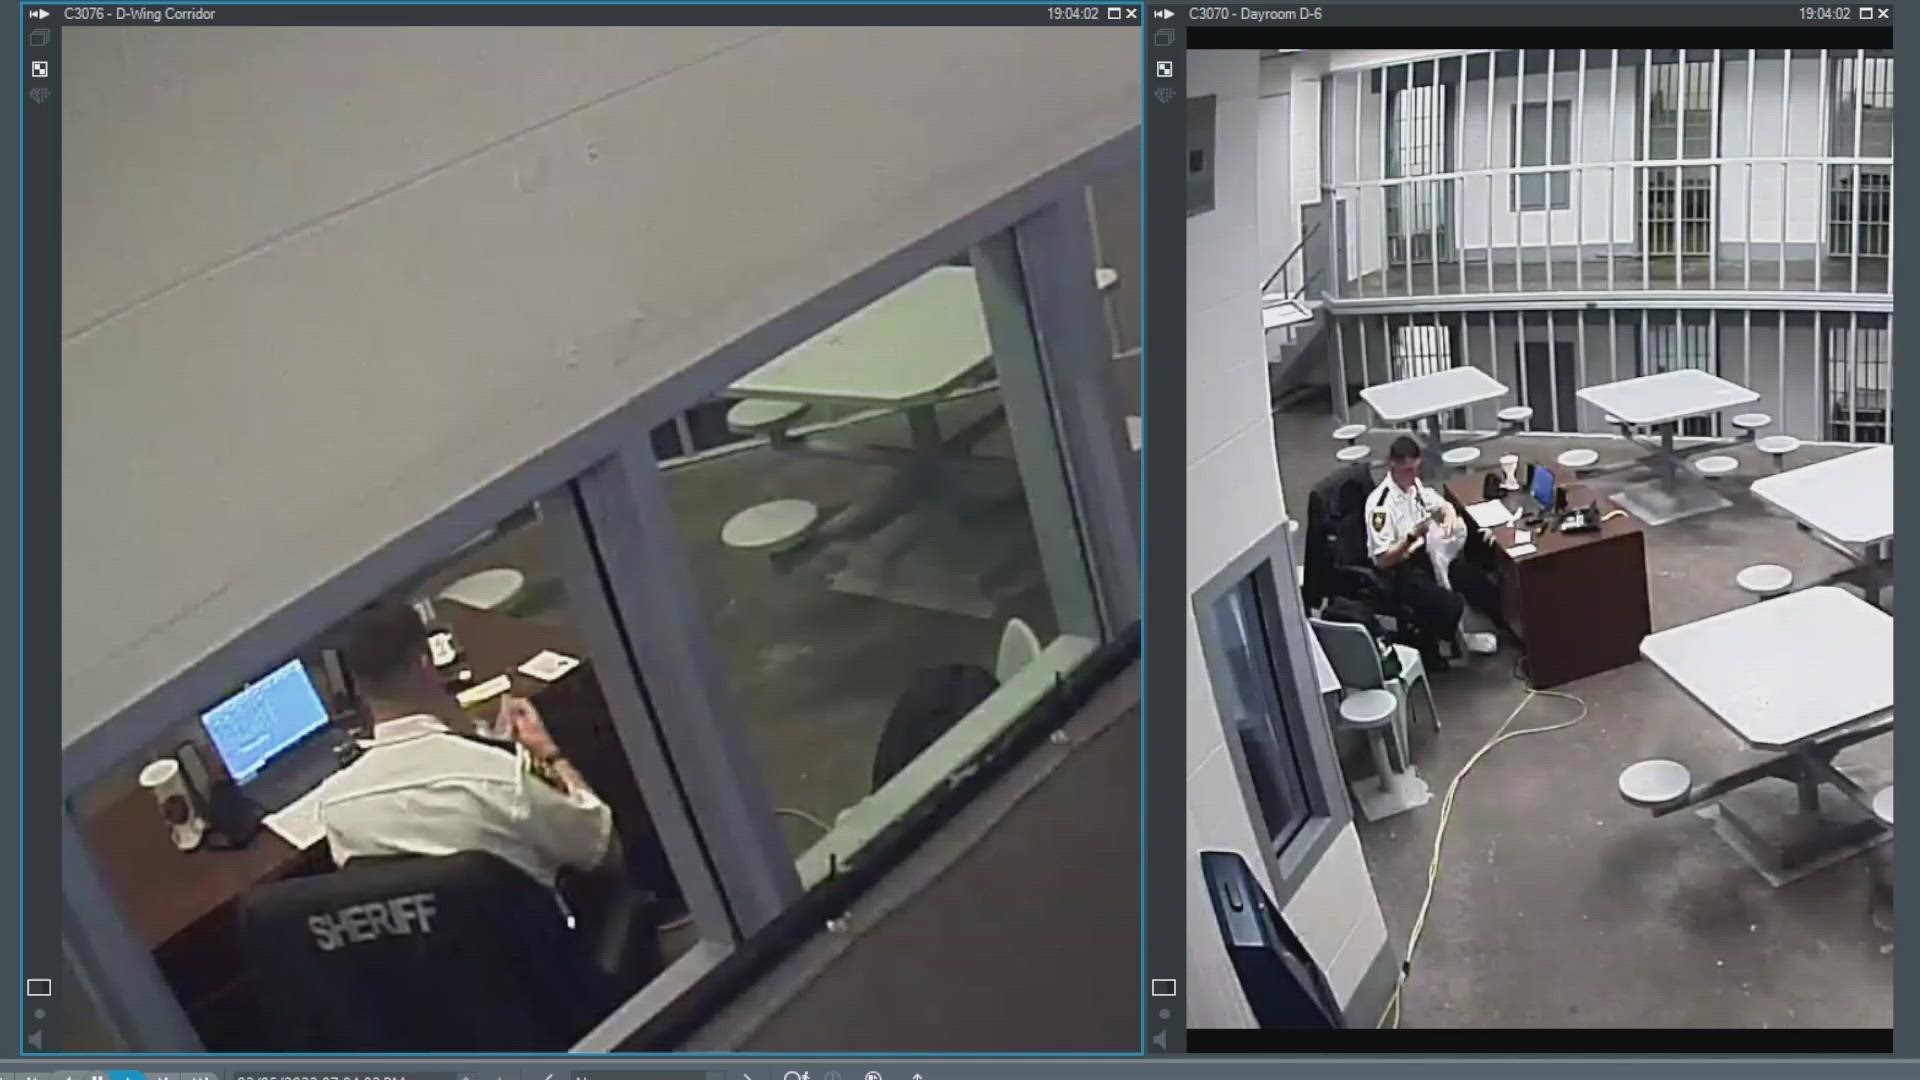 Surveillance video showed Deputy Conner Davis cutting up garbage bags and taping them over the windows behind a desk.